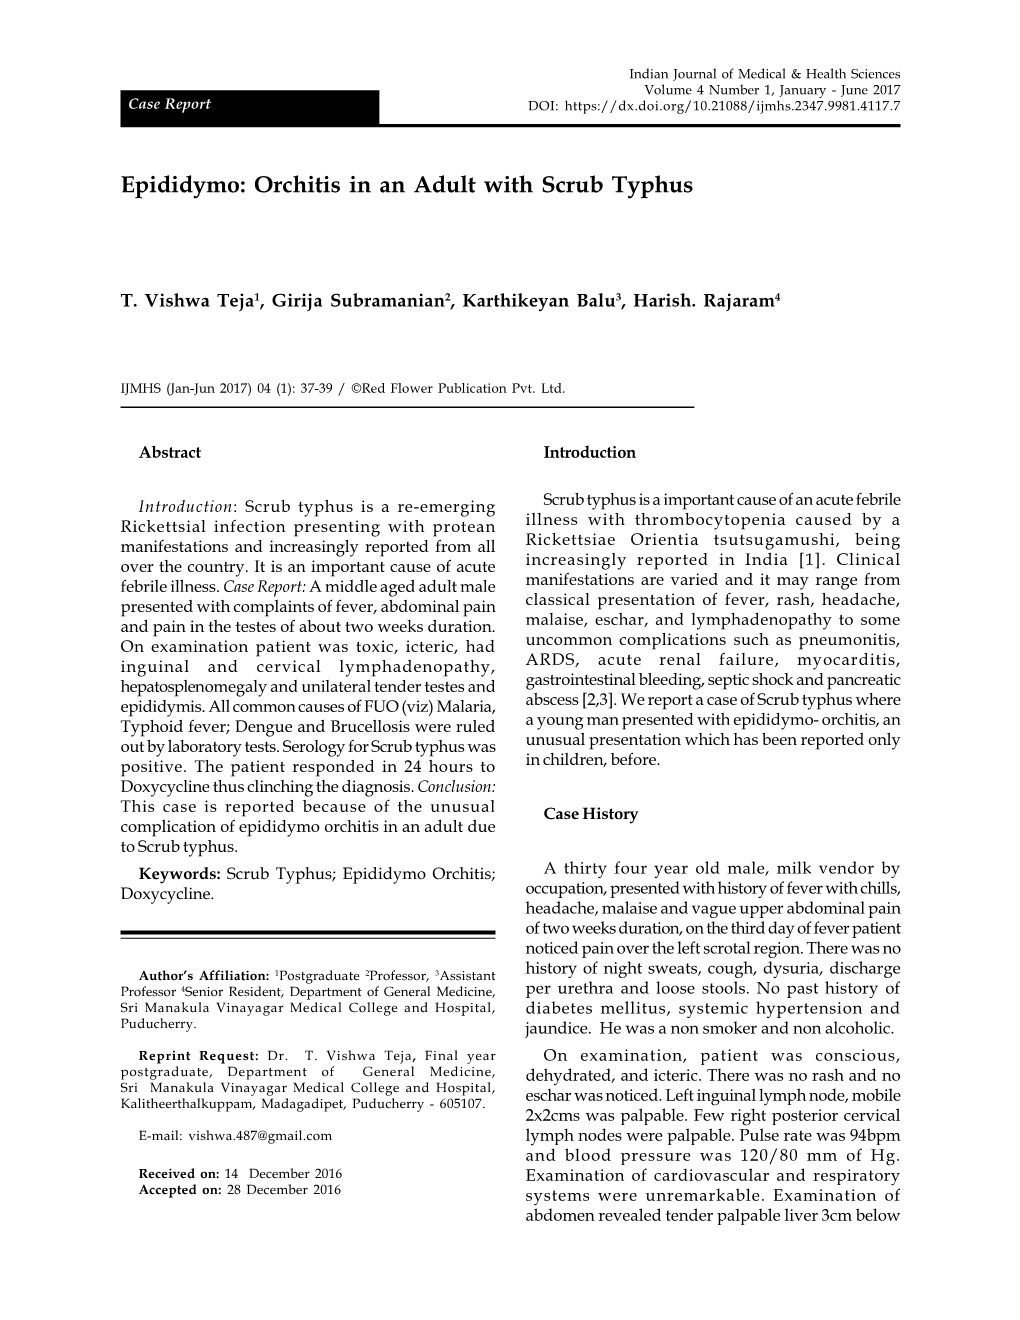 Epididymo: Orchitis in an Adult with Scrub Typhus